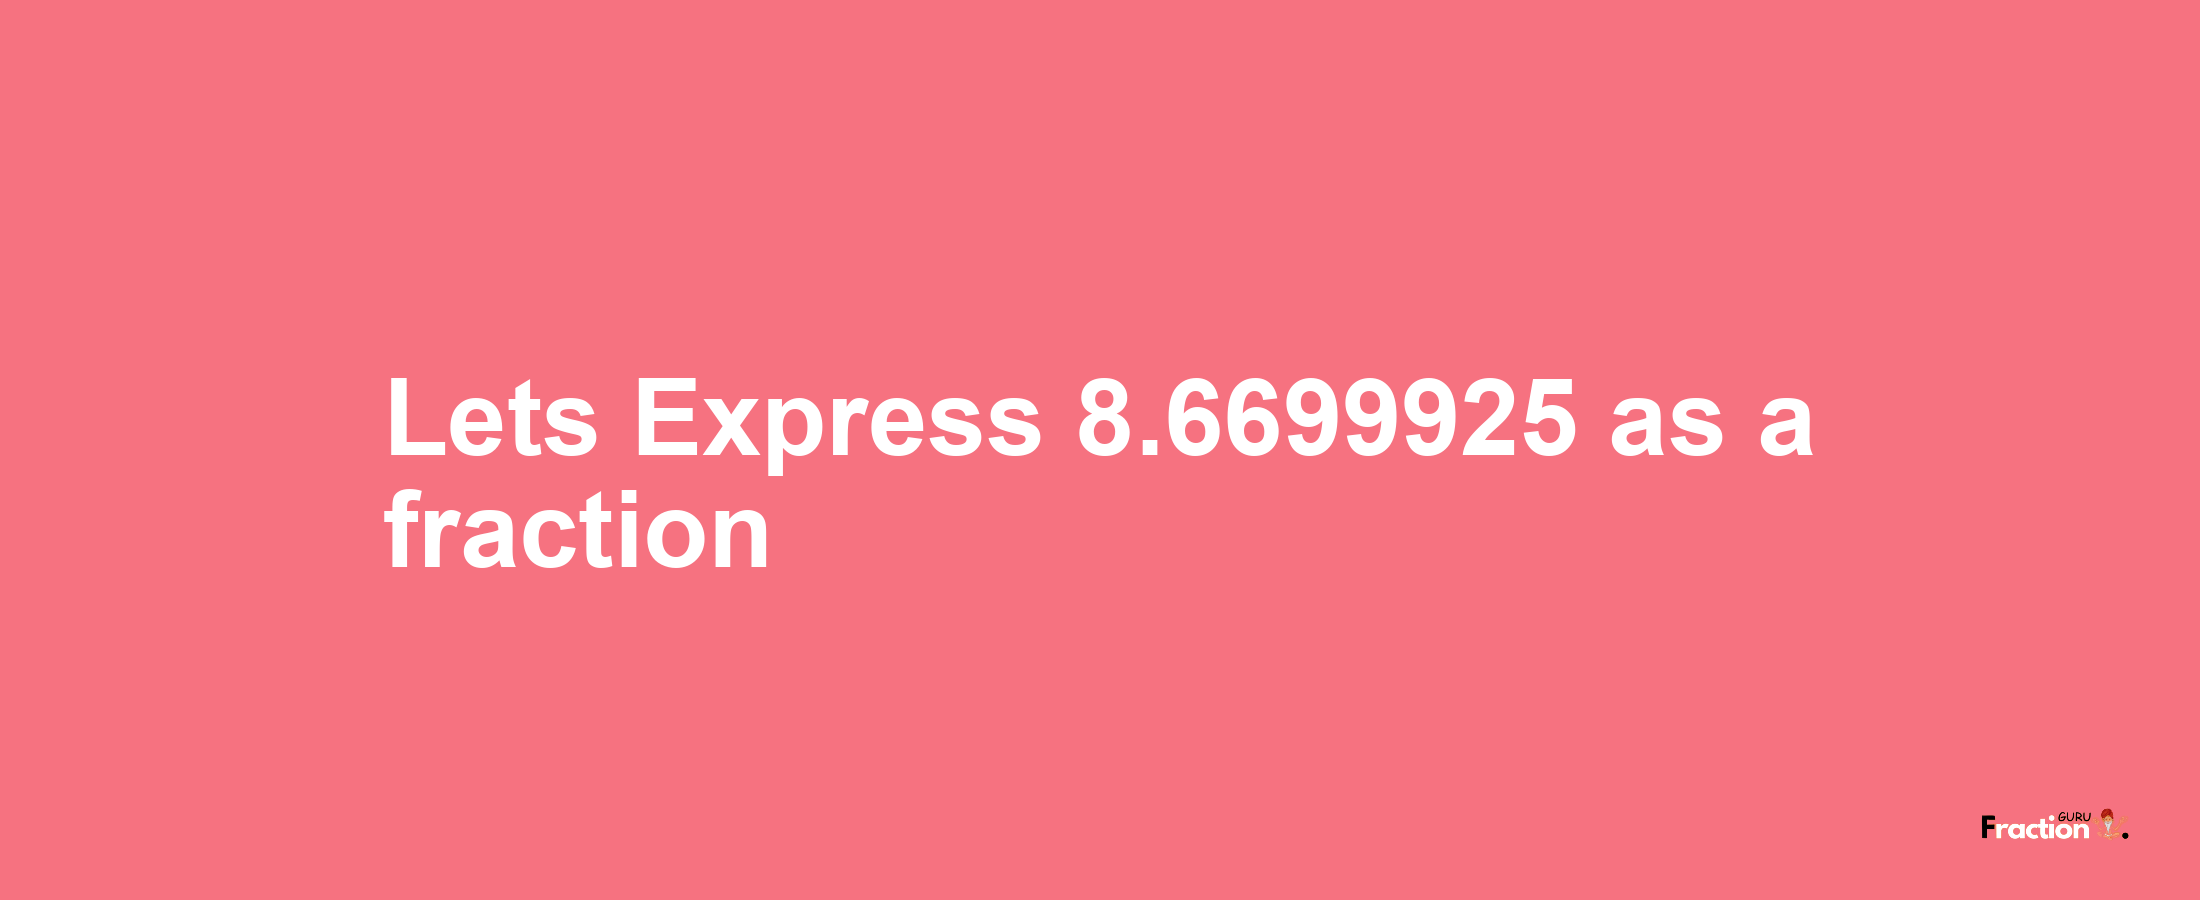 Lets Express 8.6699925 as afraction